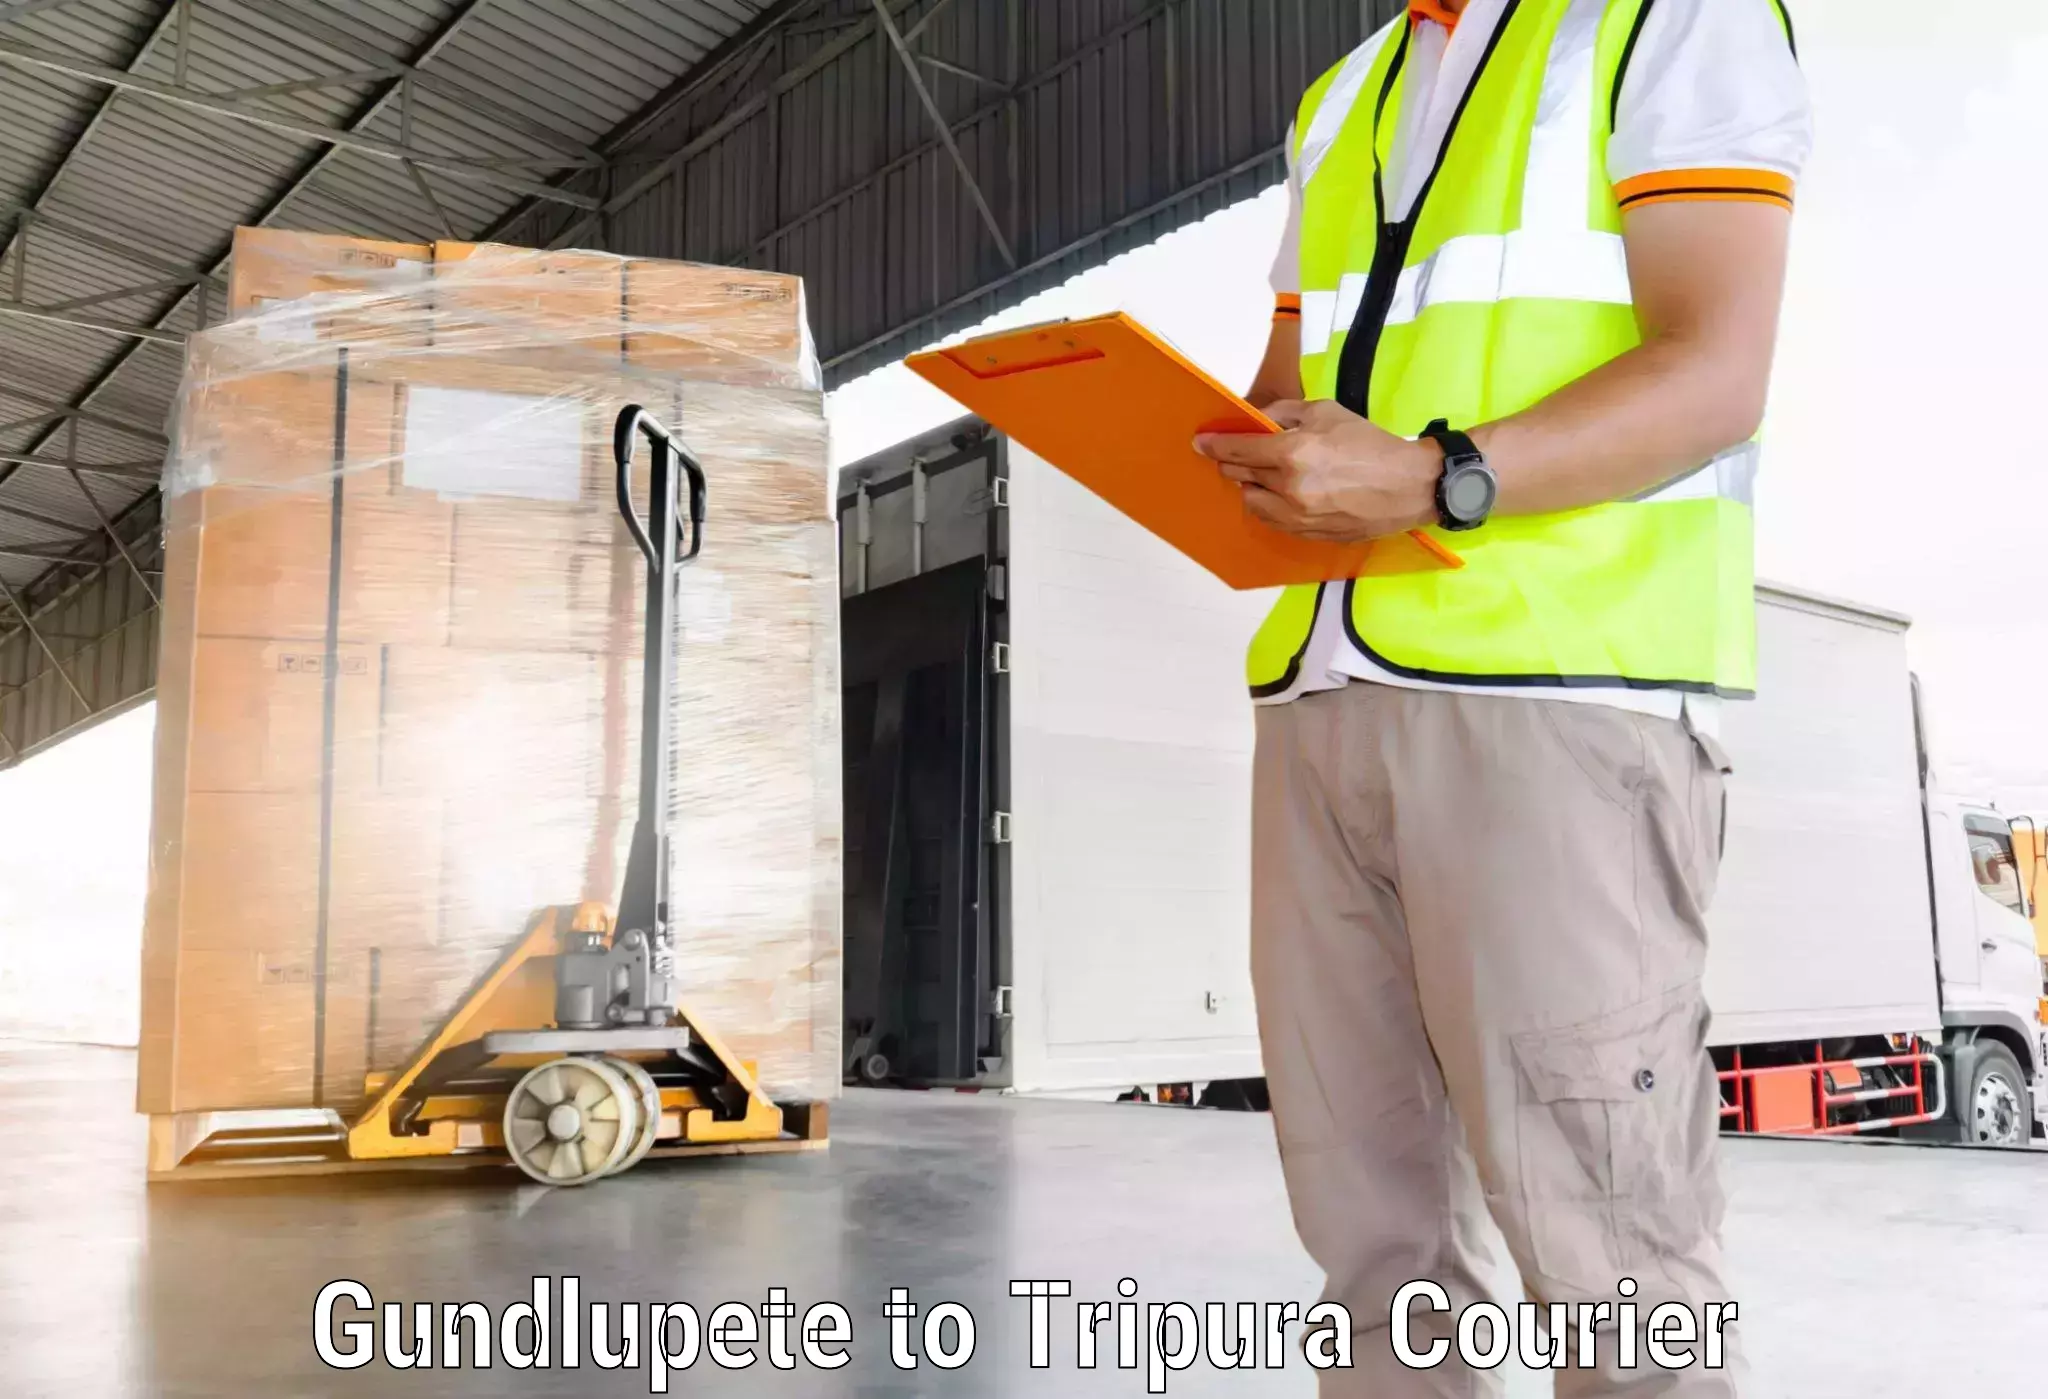 Same-day delivery options Gundlupete to Udaipur Tripura